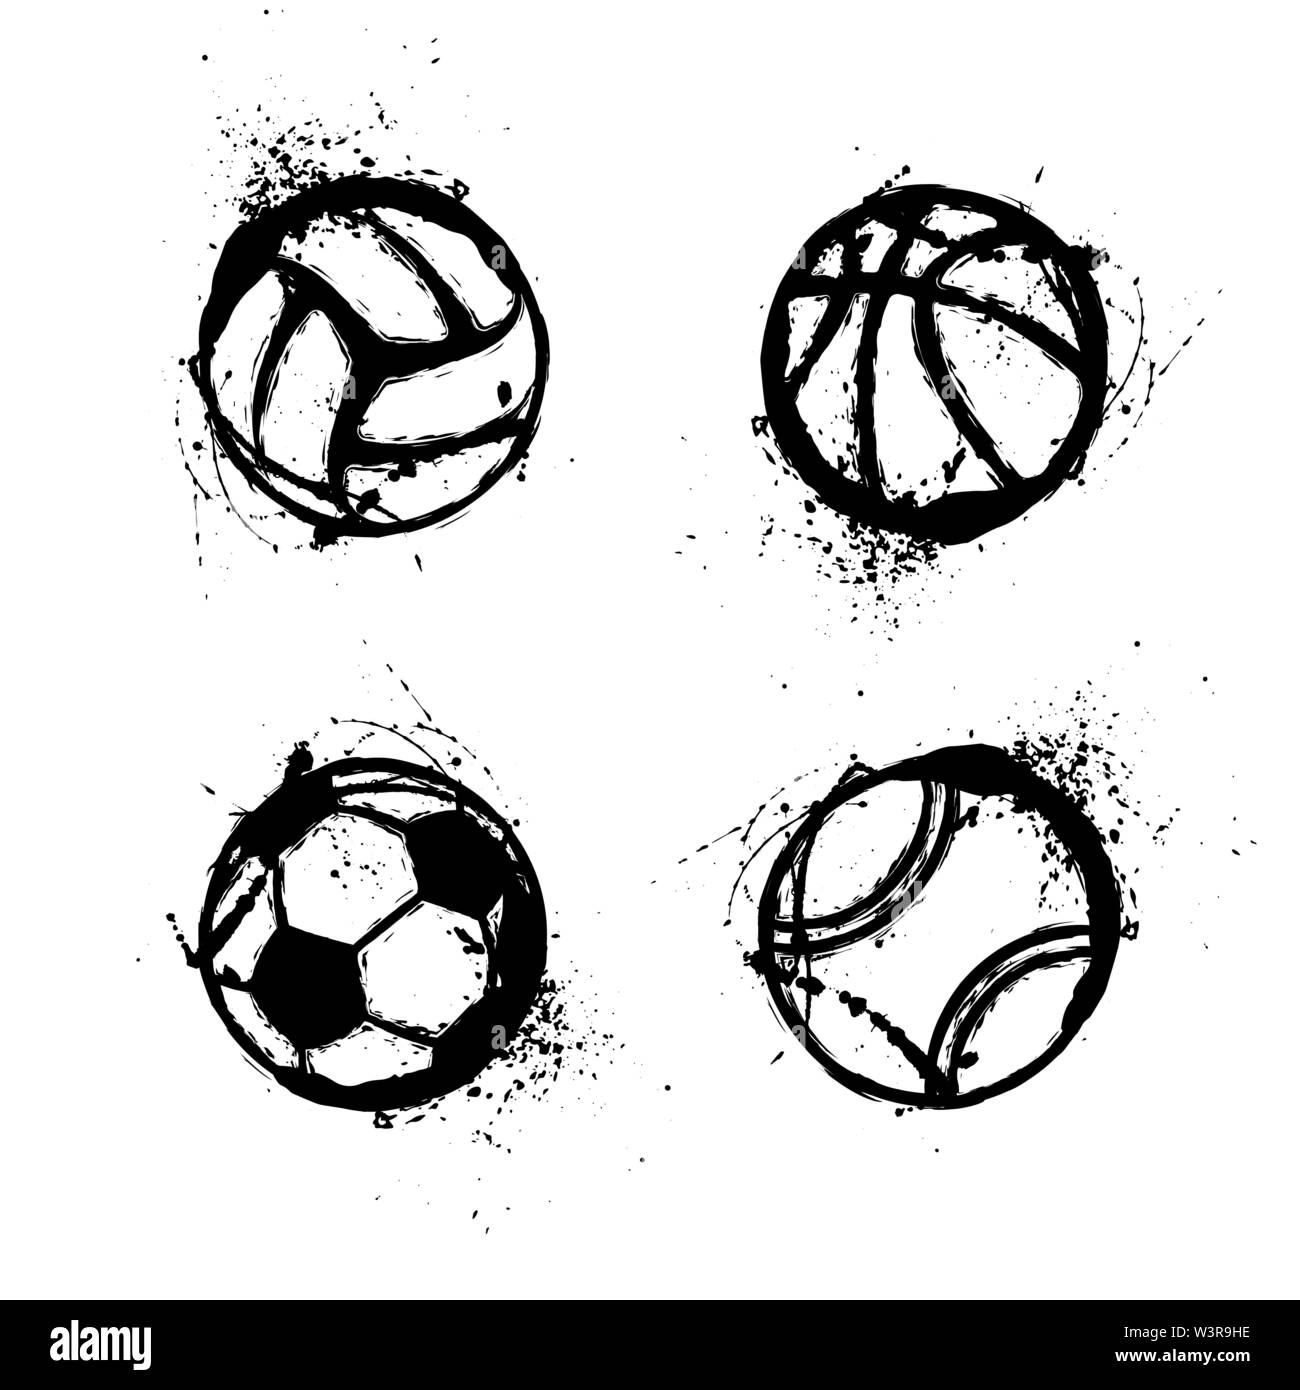 Black grunge sport ball silhouettes isolated on white Stock Vector